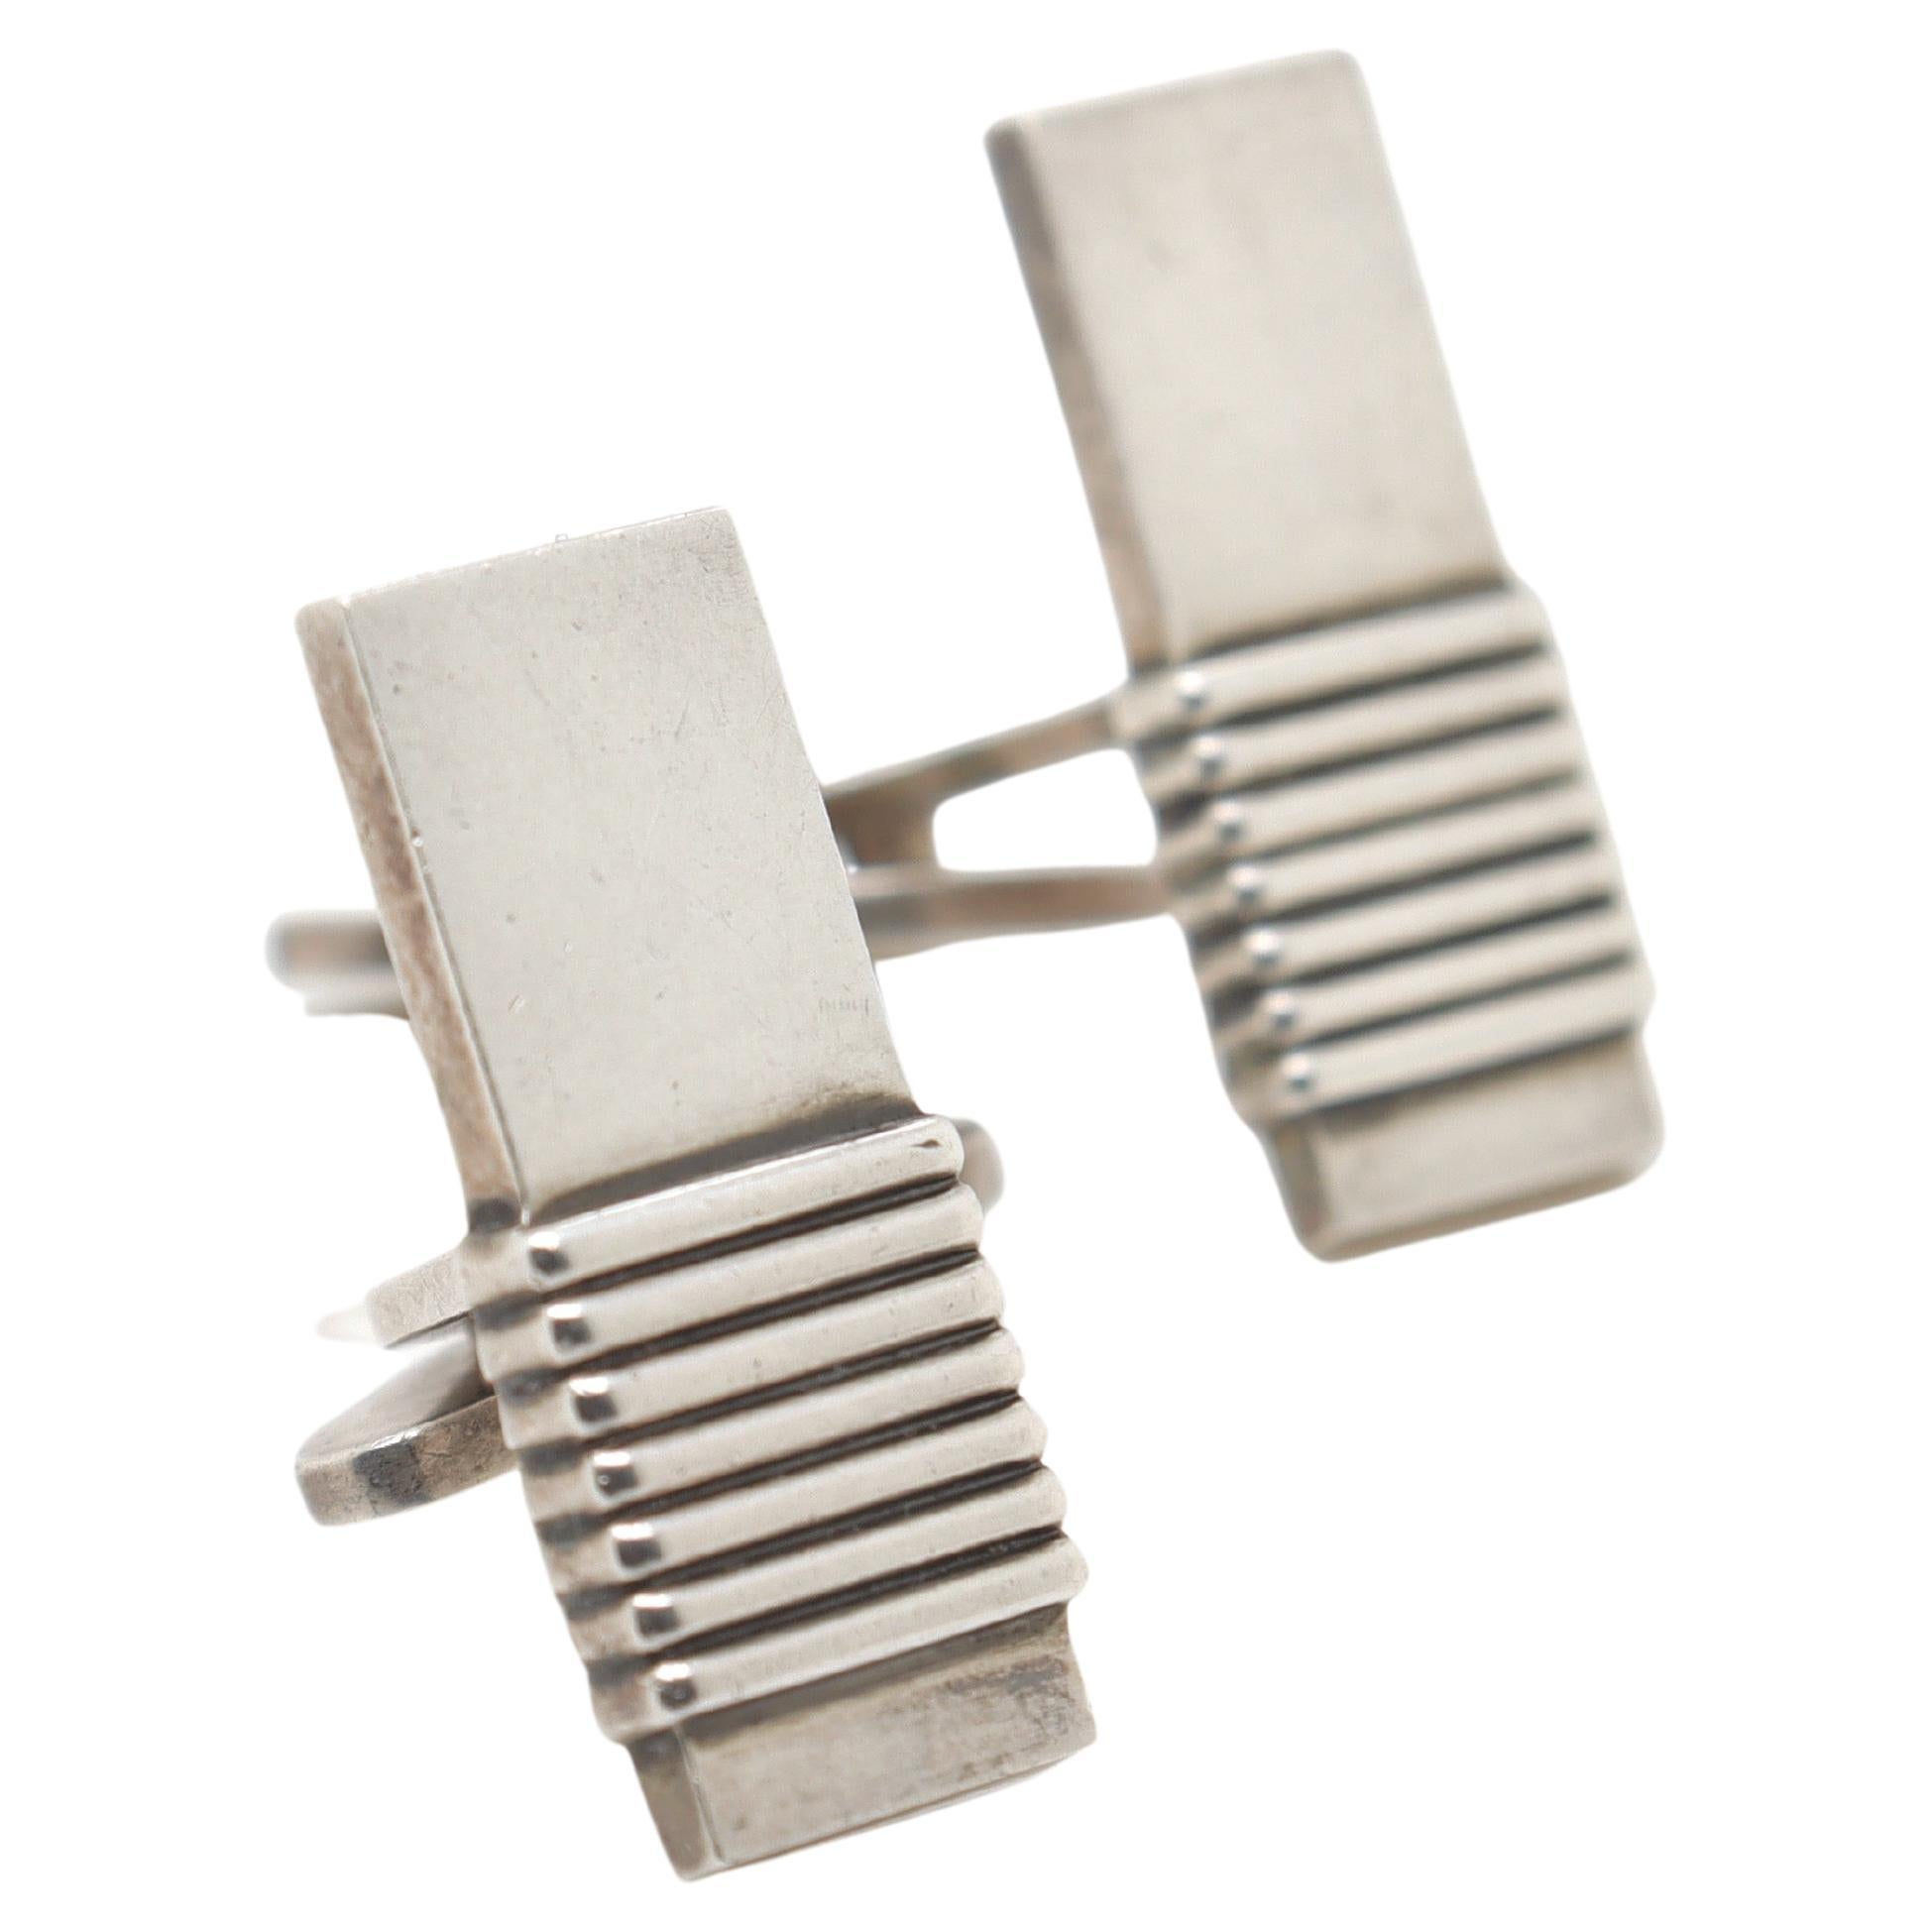 A fine pair of Georg Jensen sterling silver cufflinks

Model no. 80.

Designed by Harold Nielsen for Georg Jensen

Simply a wonderful pair of cufflinks from one of Denmark's premier silversmiths!

Date:
20th Century, post-1945

Overall